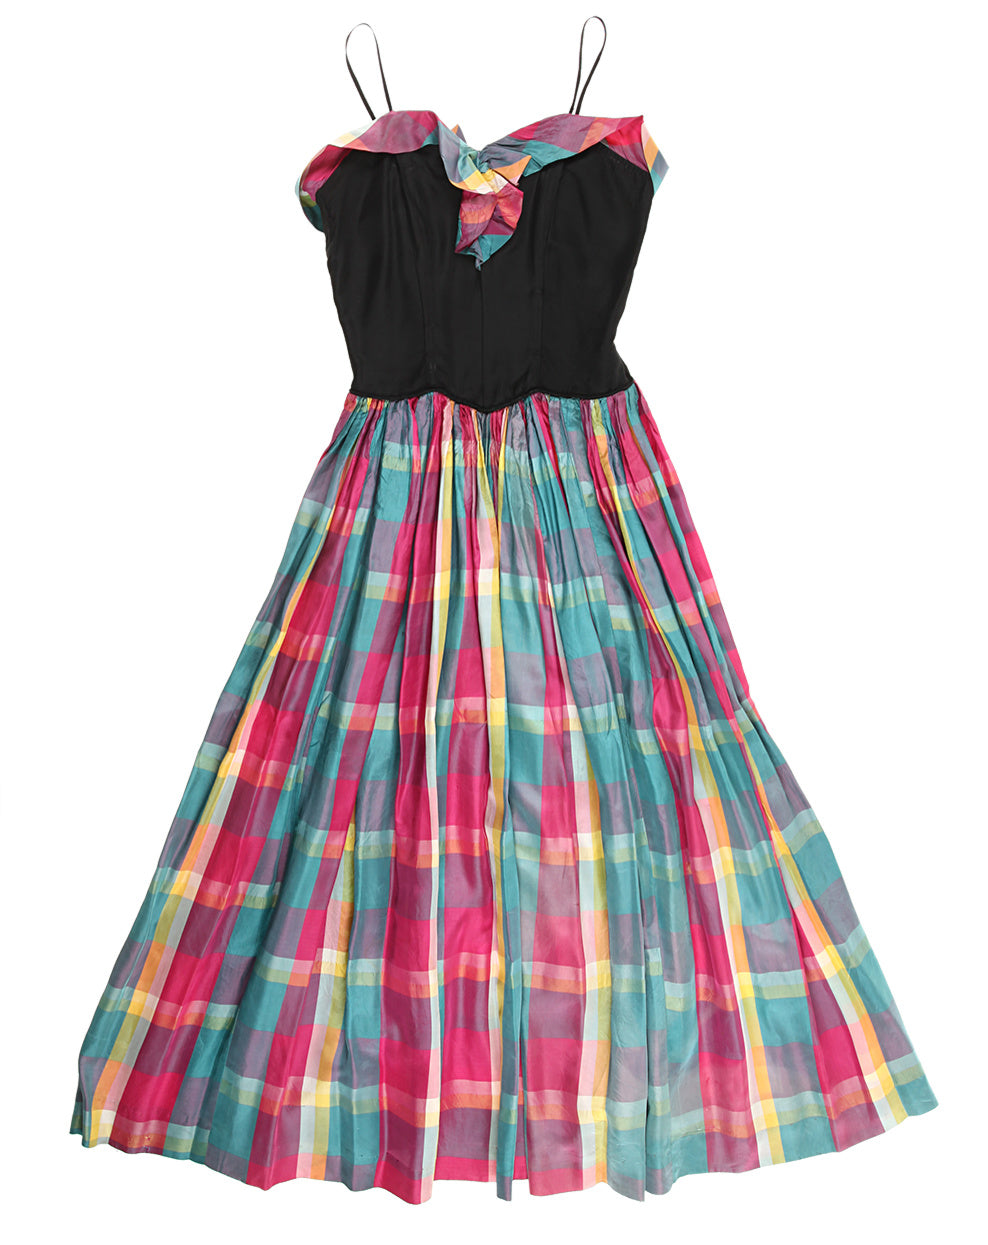 Vintage 50s Multicolored Checked Party Dress - XS